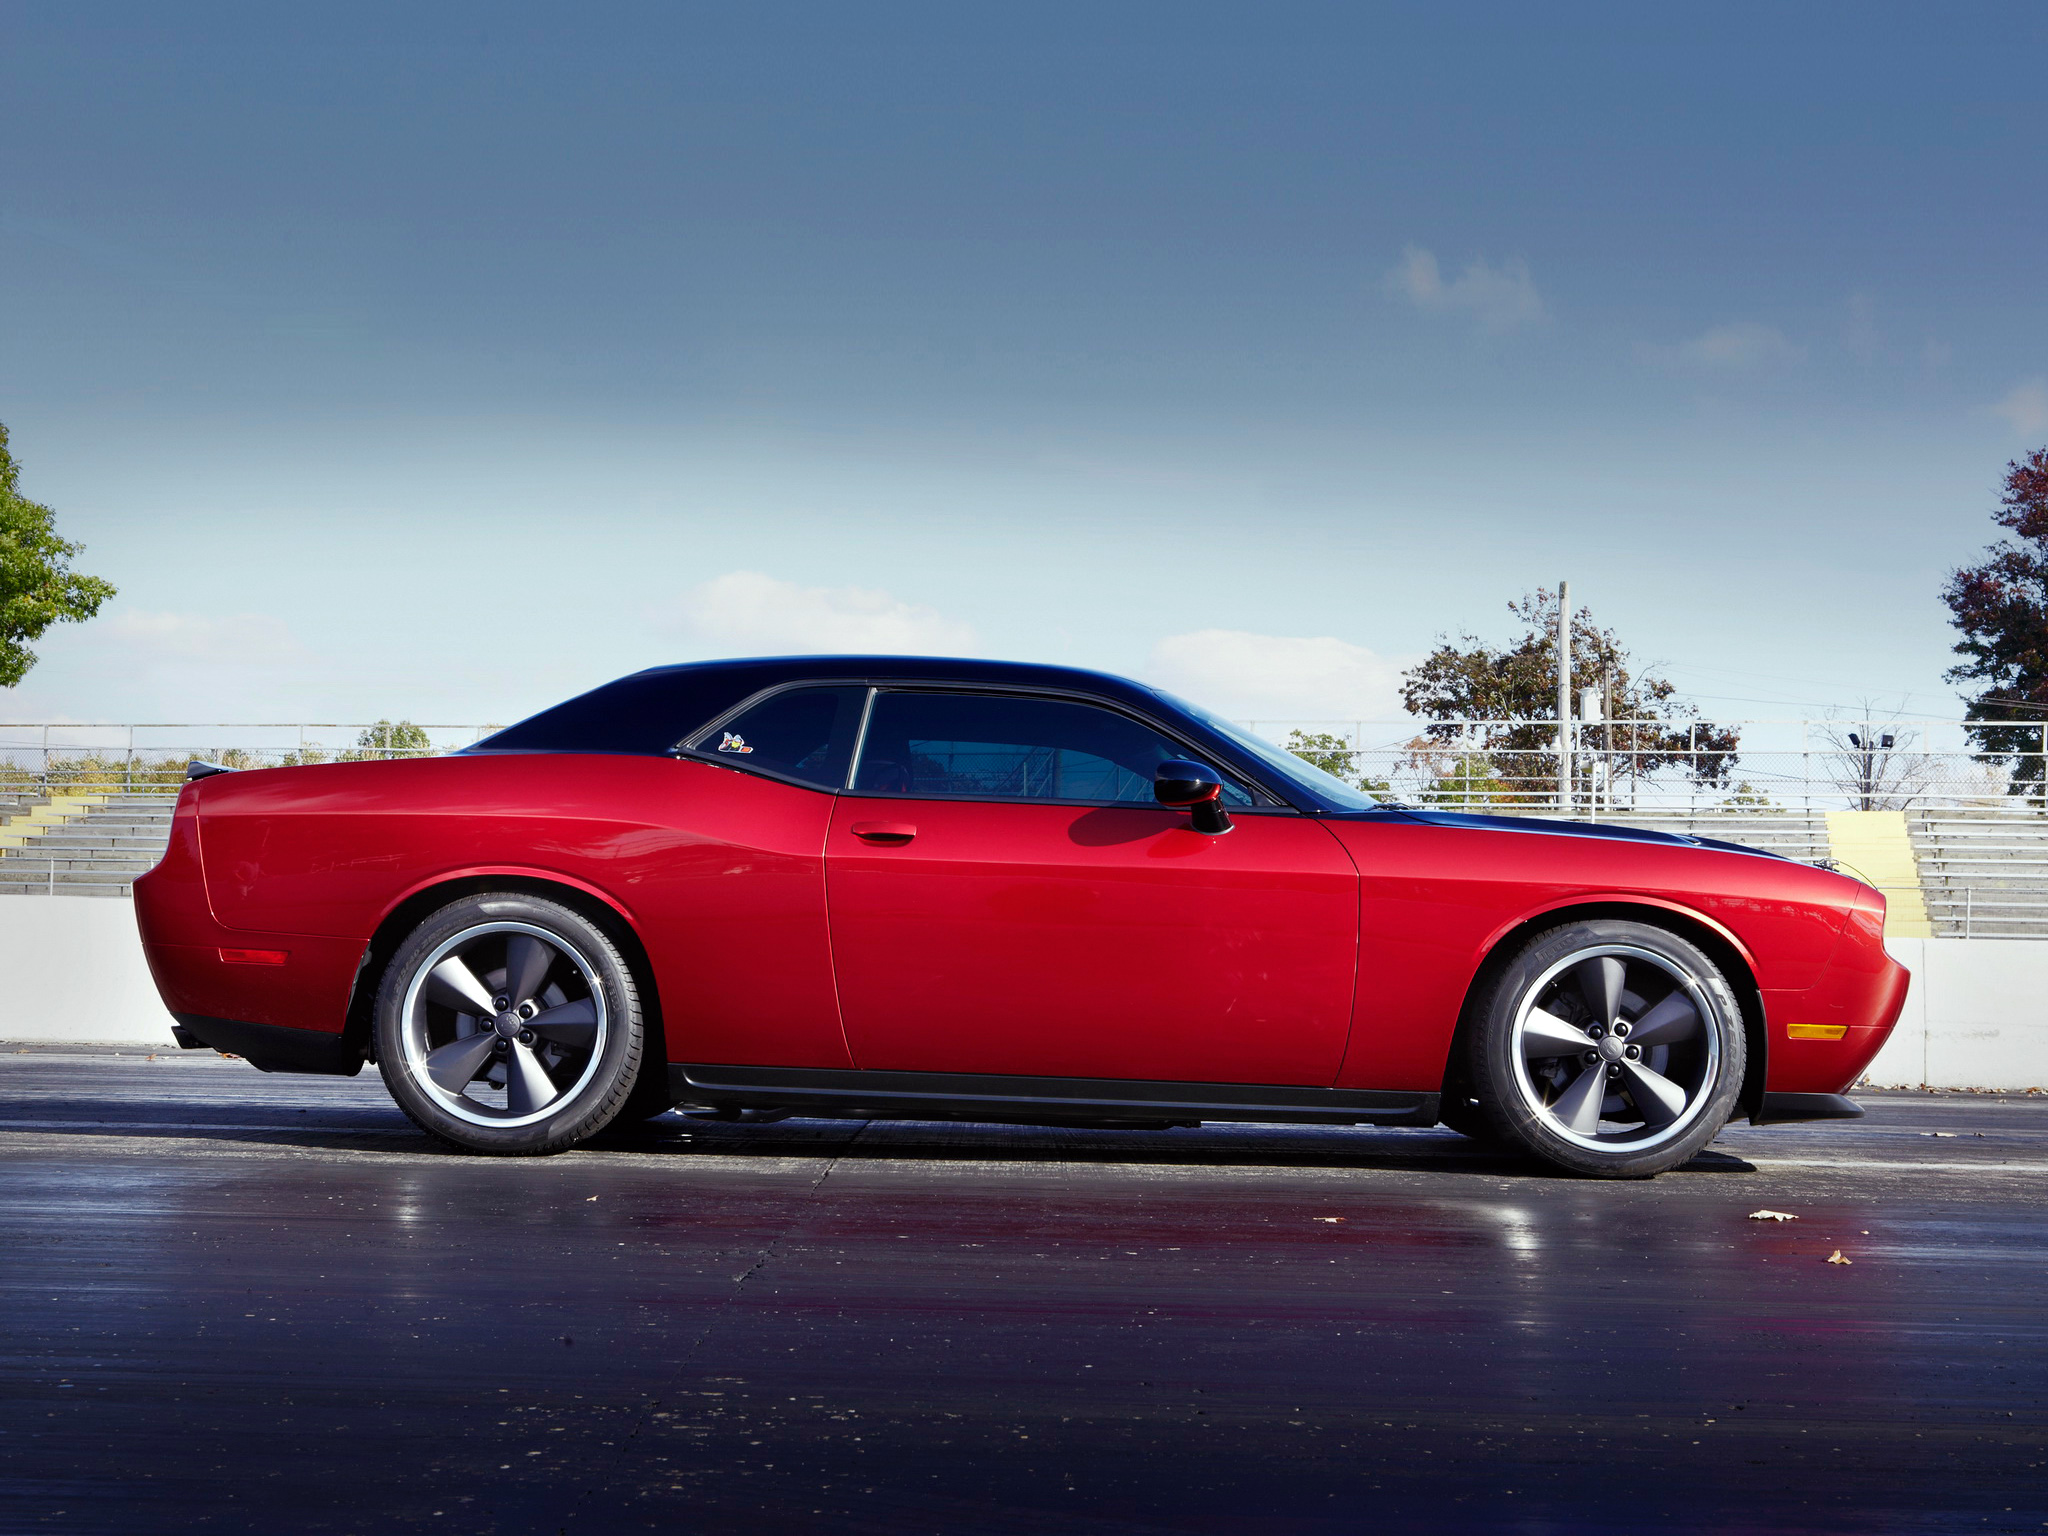 2014, Dodge, Challenger, R t, Scat package 3, Muscle, Tuning Wallpaper